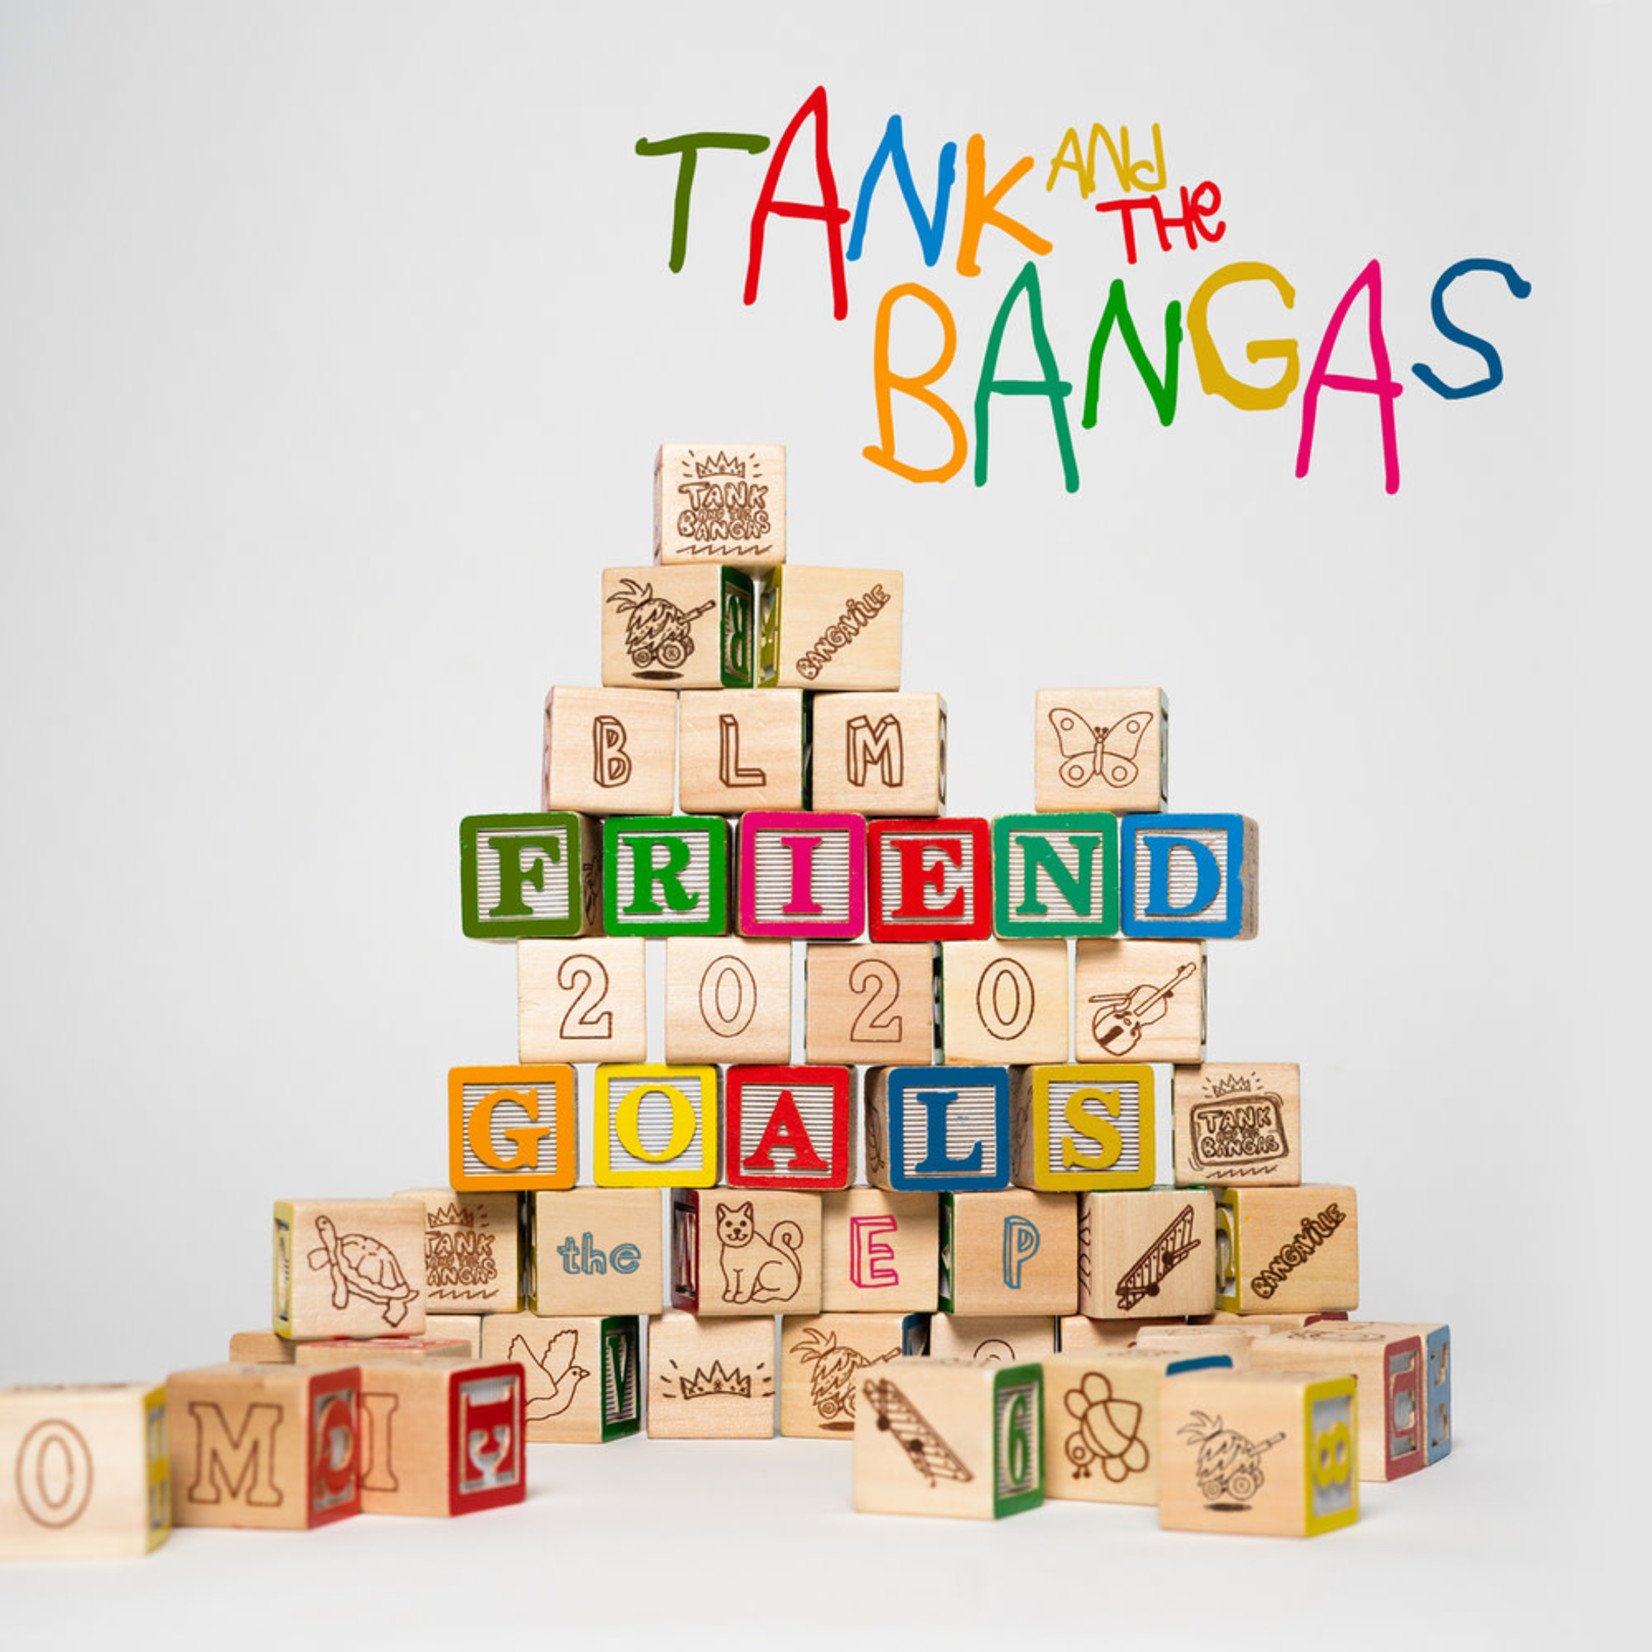 [New] Tank and The Bangas - Friend Goals